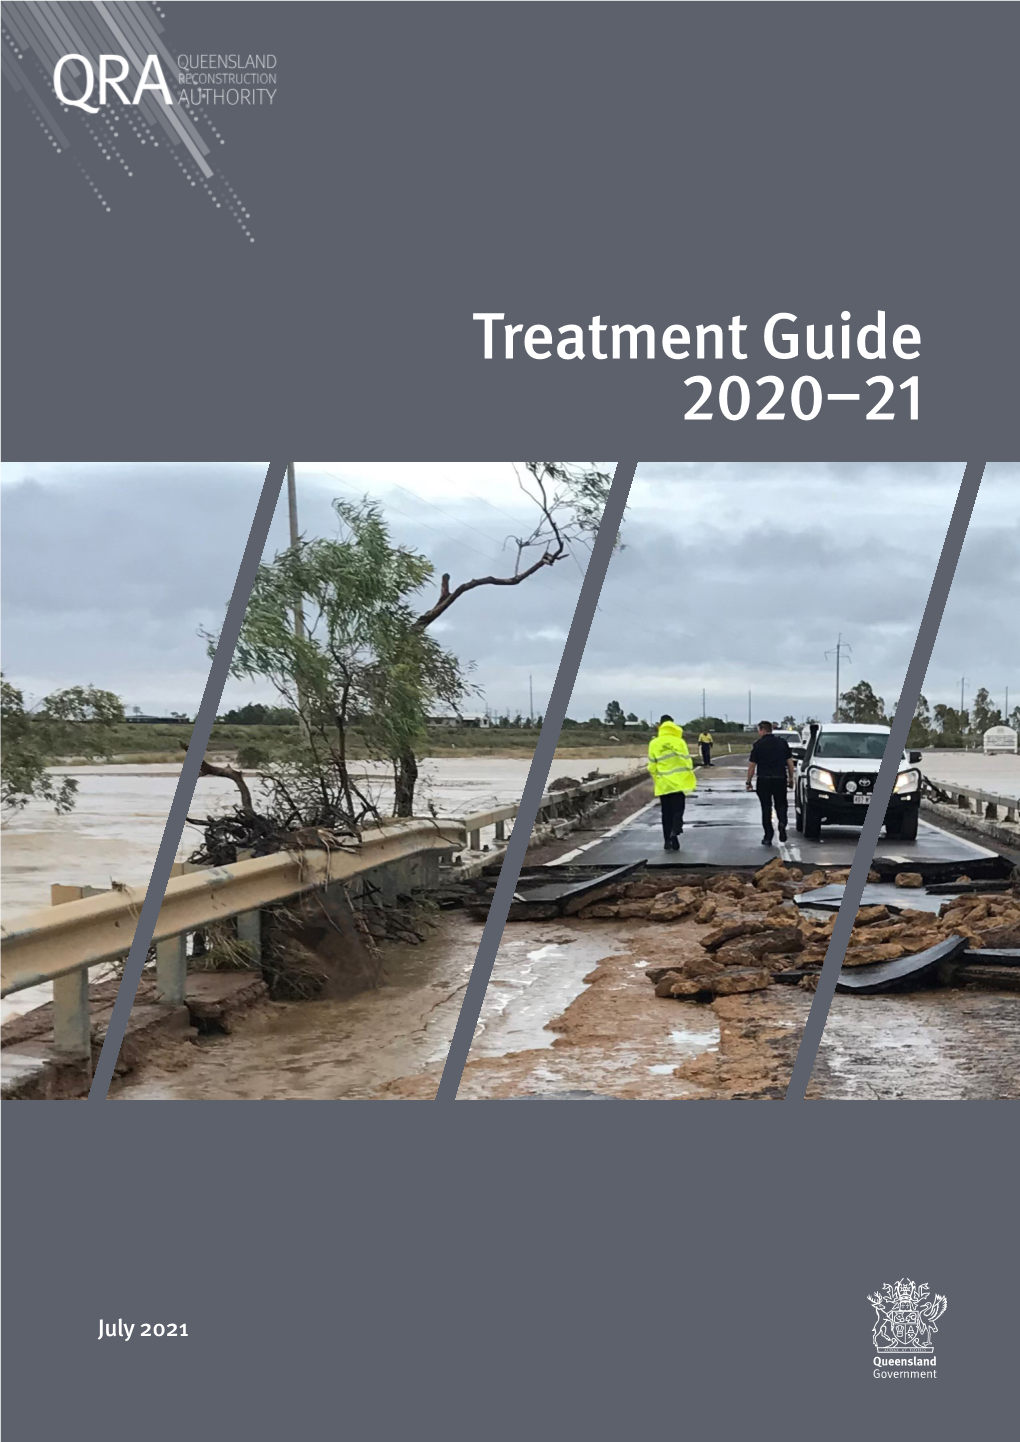 Treatment Guide (2020-21)